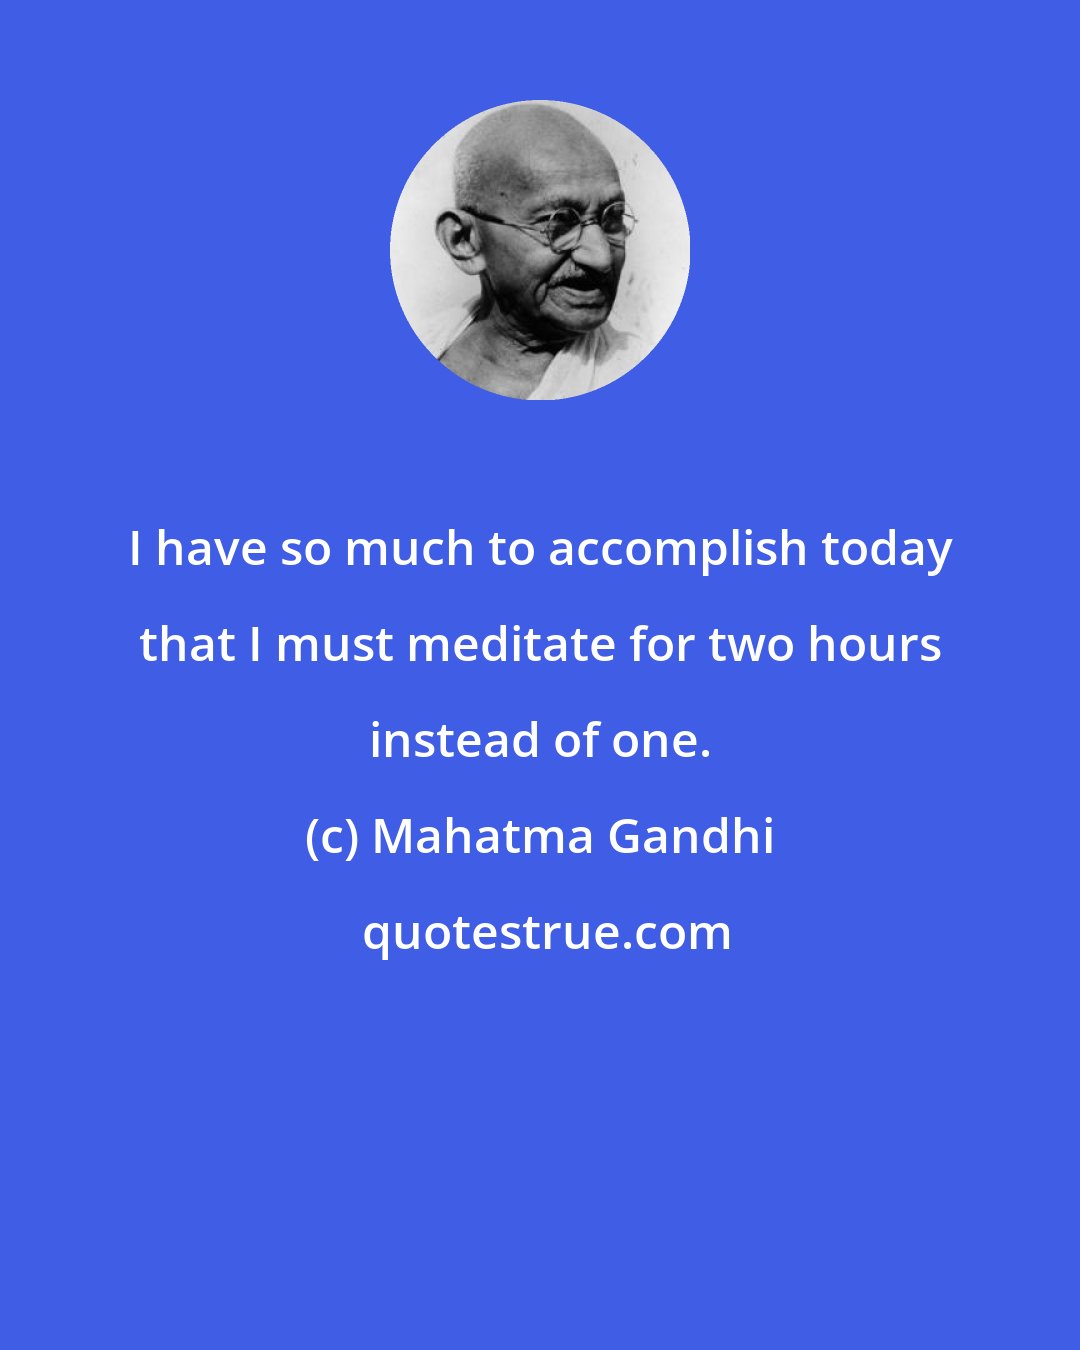 Mahatma Gandhi: I have so much to accomplish today that I must meditate for two hours instead of one.